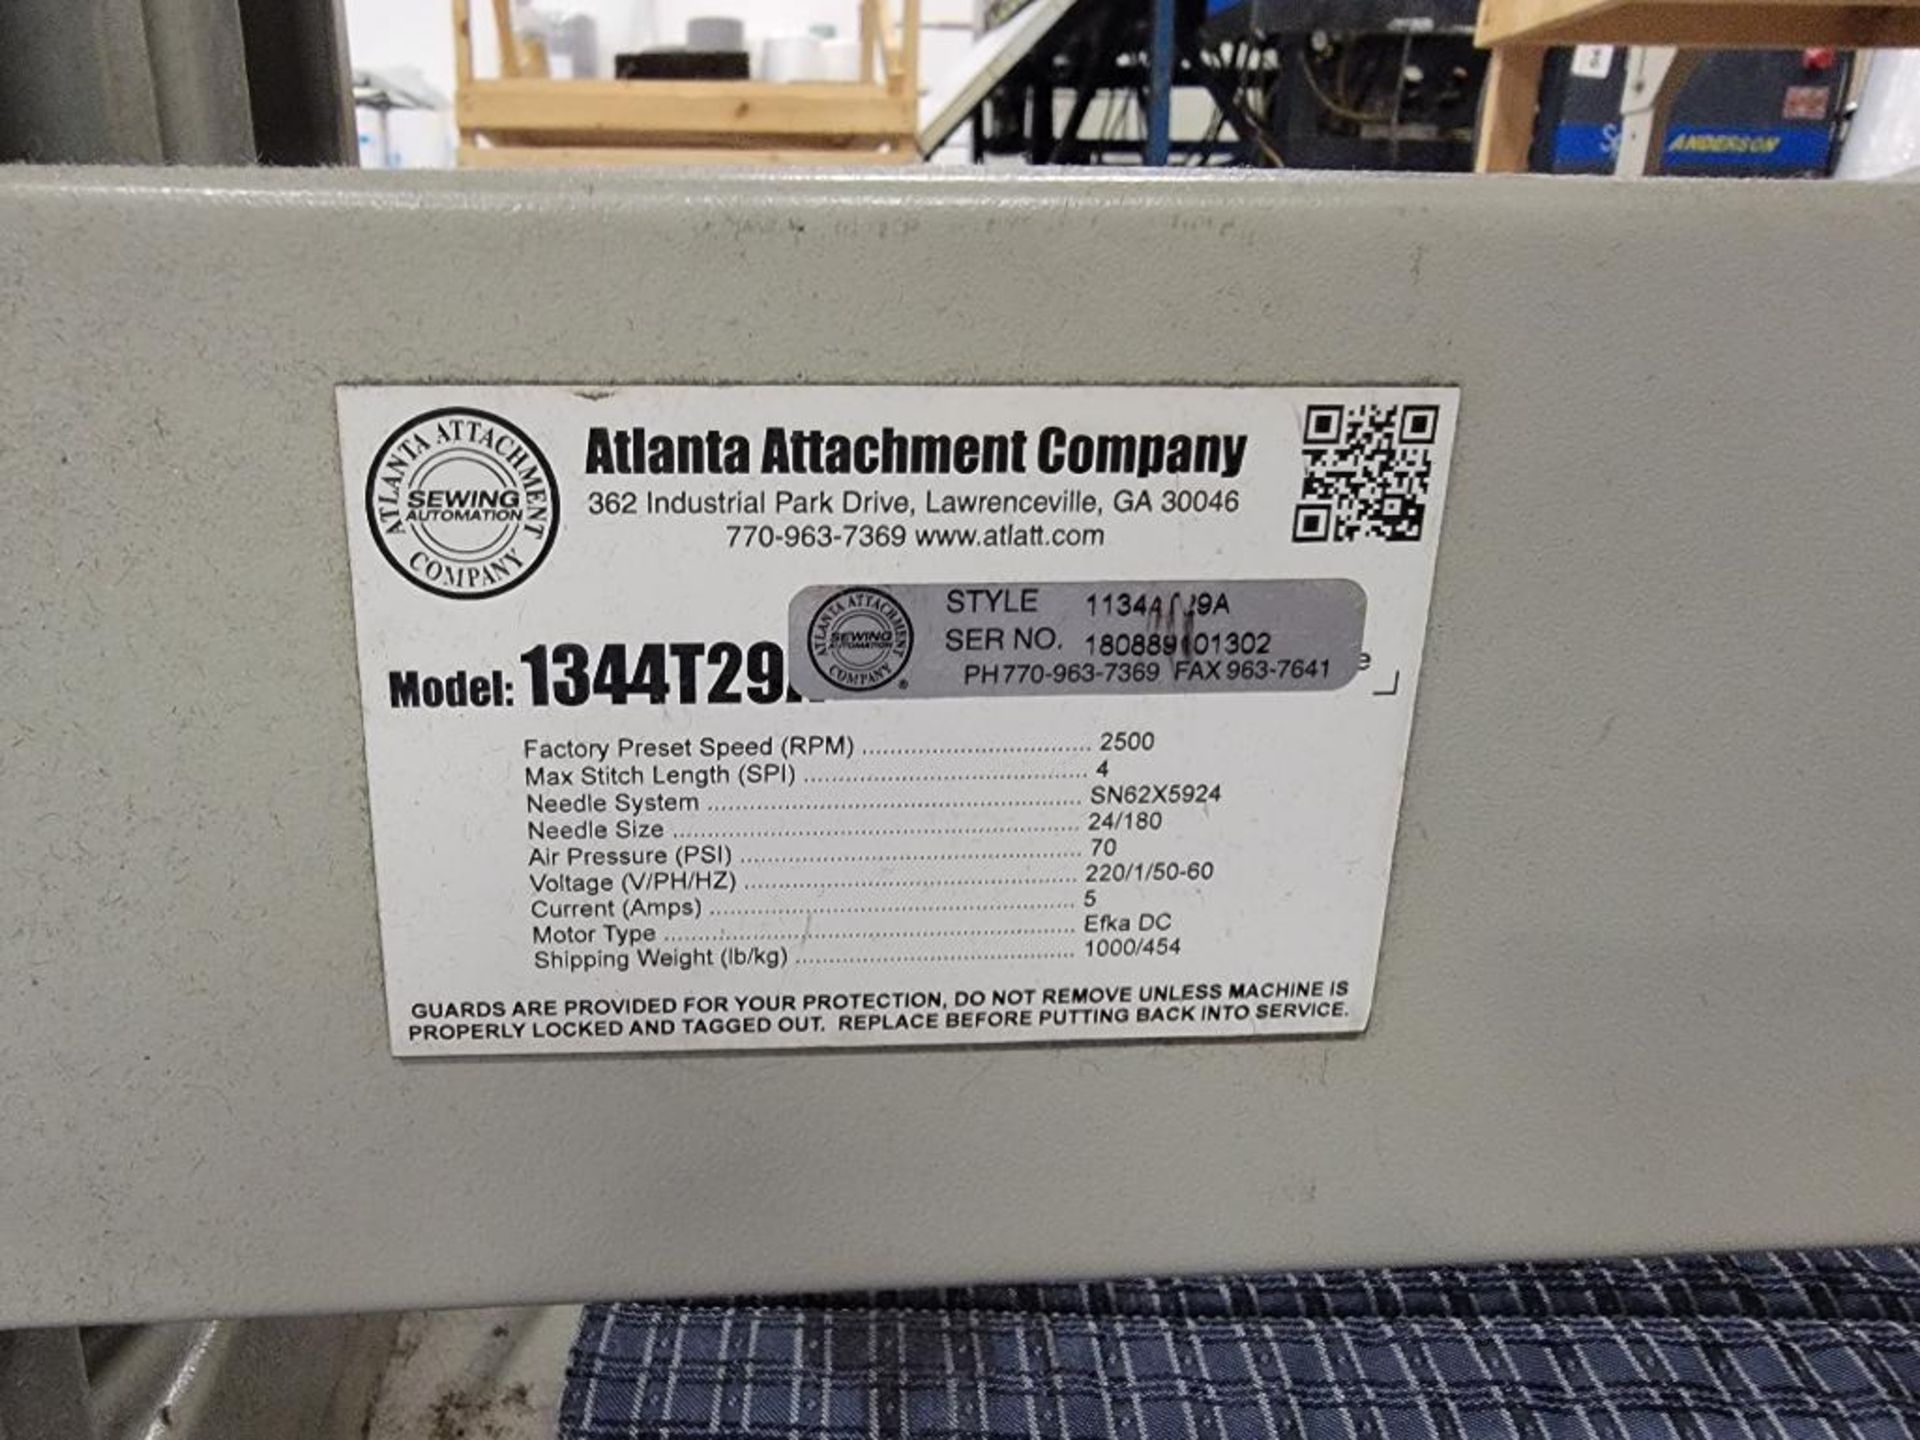 Atlanta Attachment Compound Feed Mattress Bucket Building Sewing Machine Model 1344T29 S/N 180889101 - Image 6 of 7